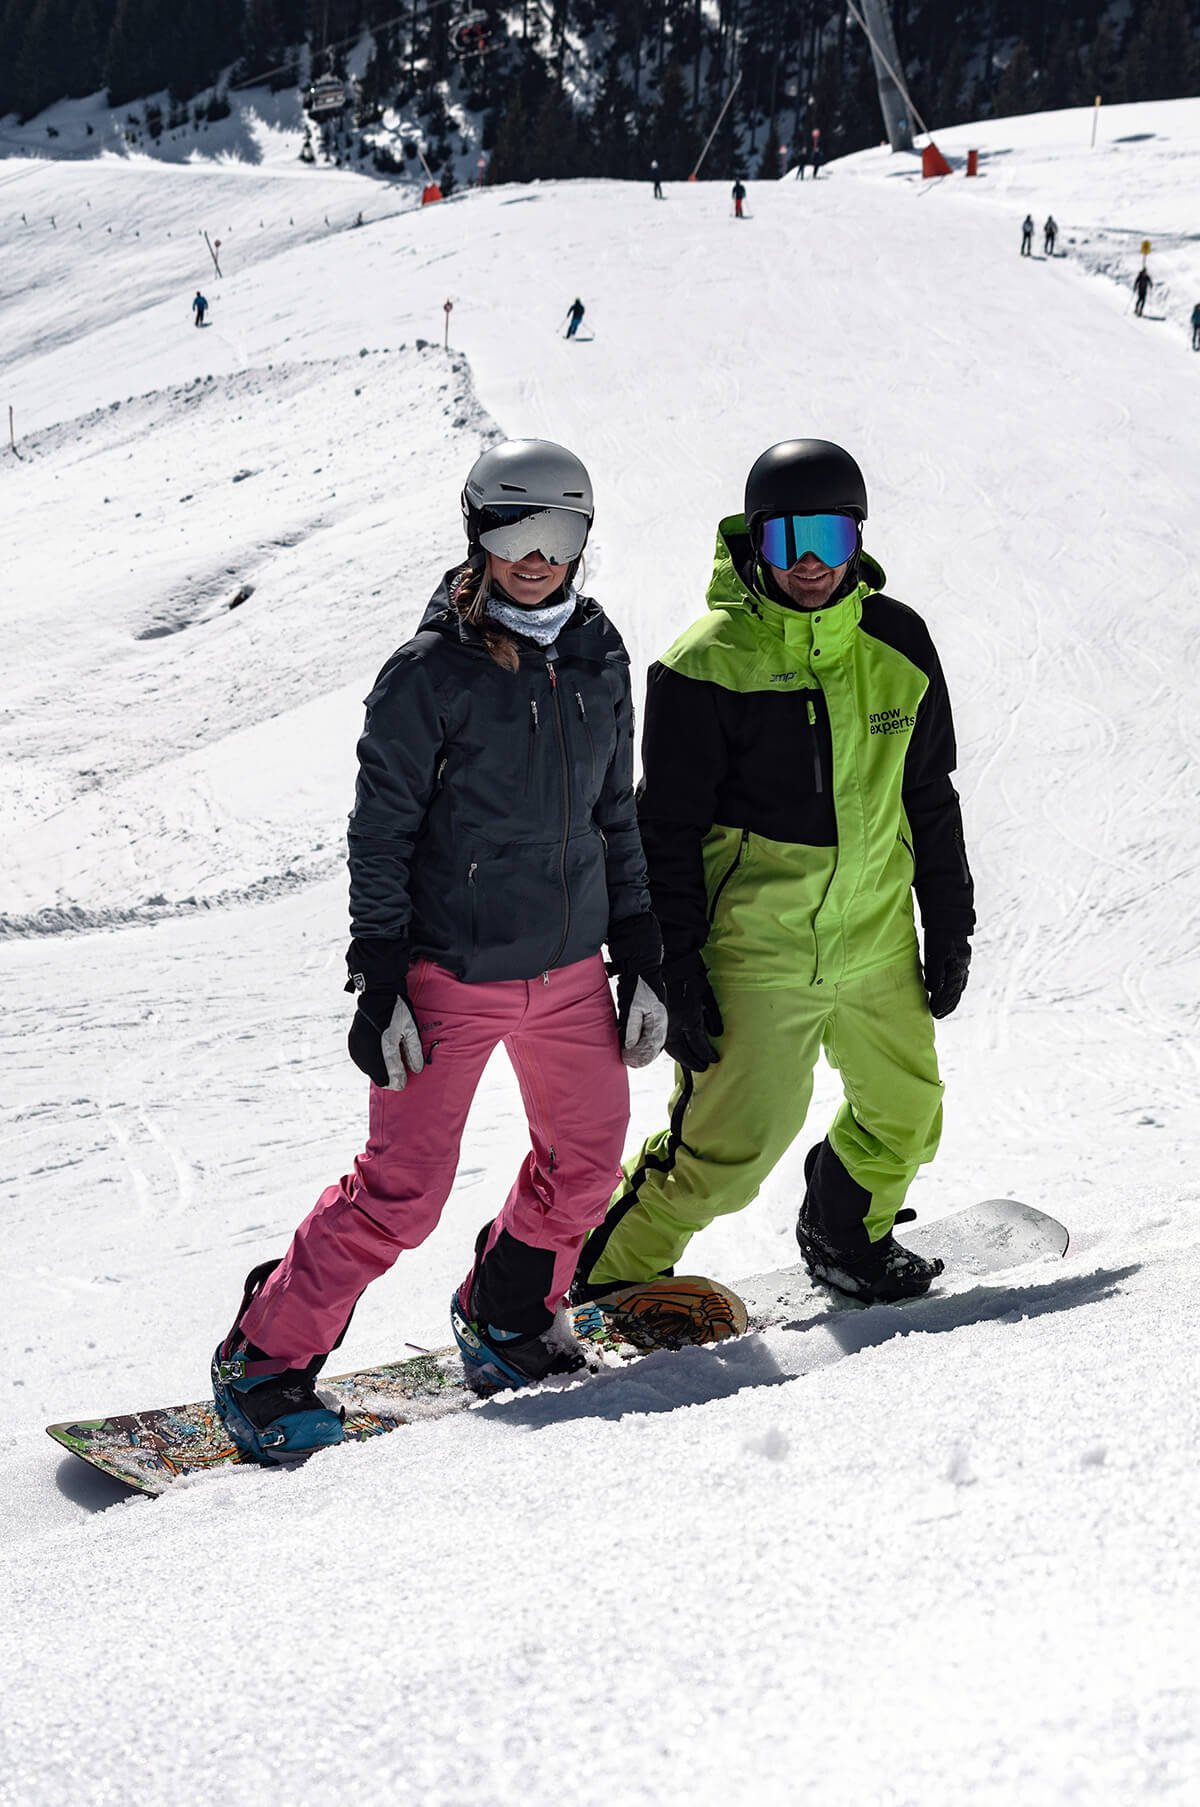 Snowboard courses for all levels